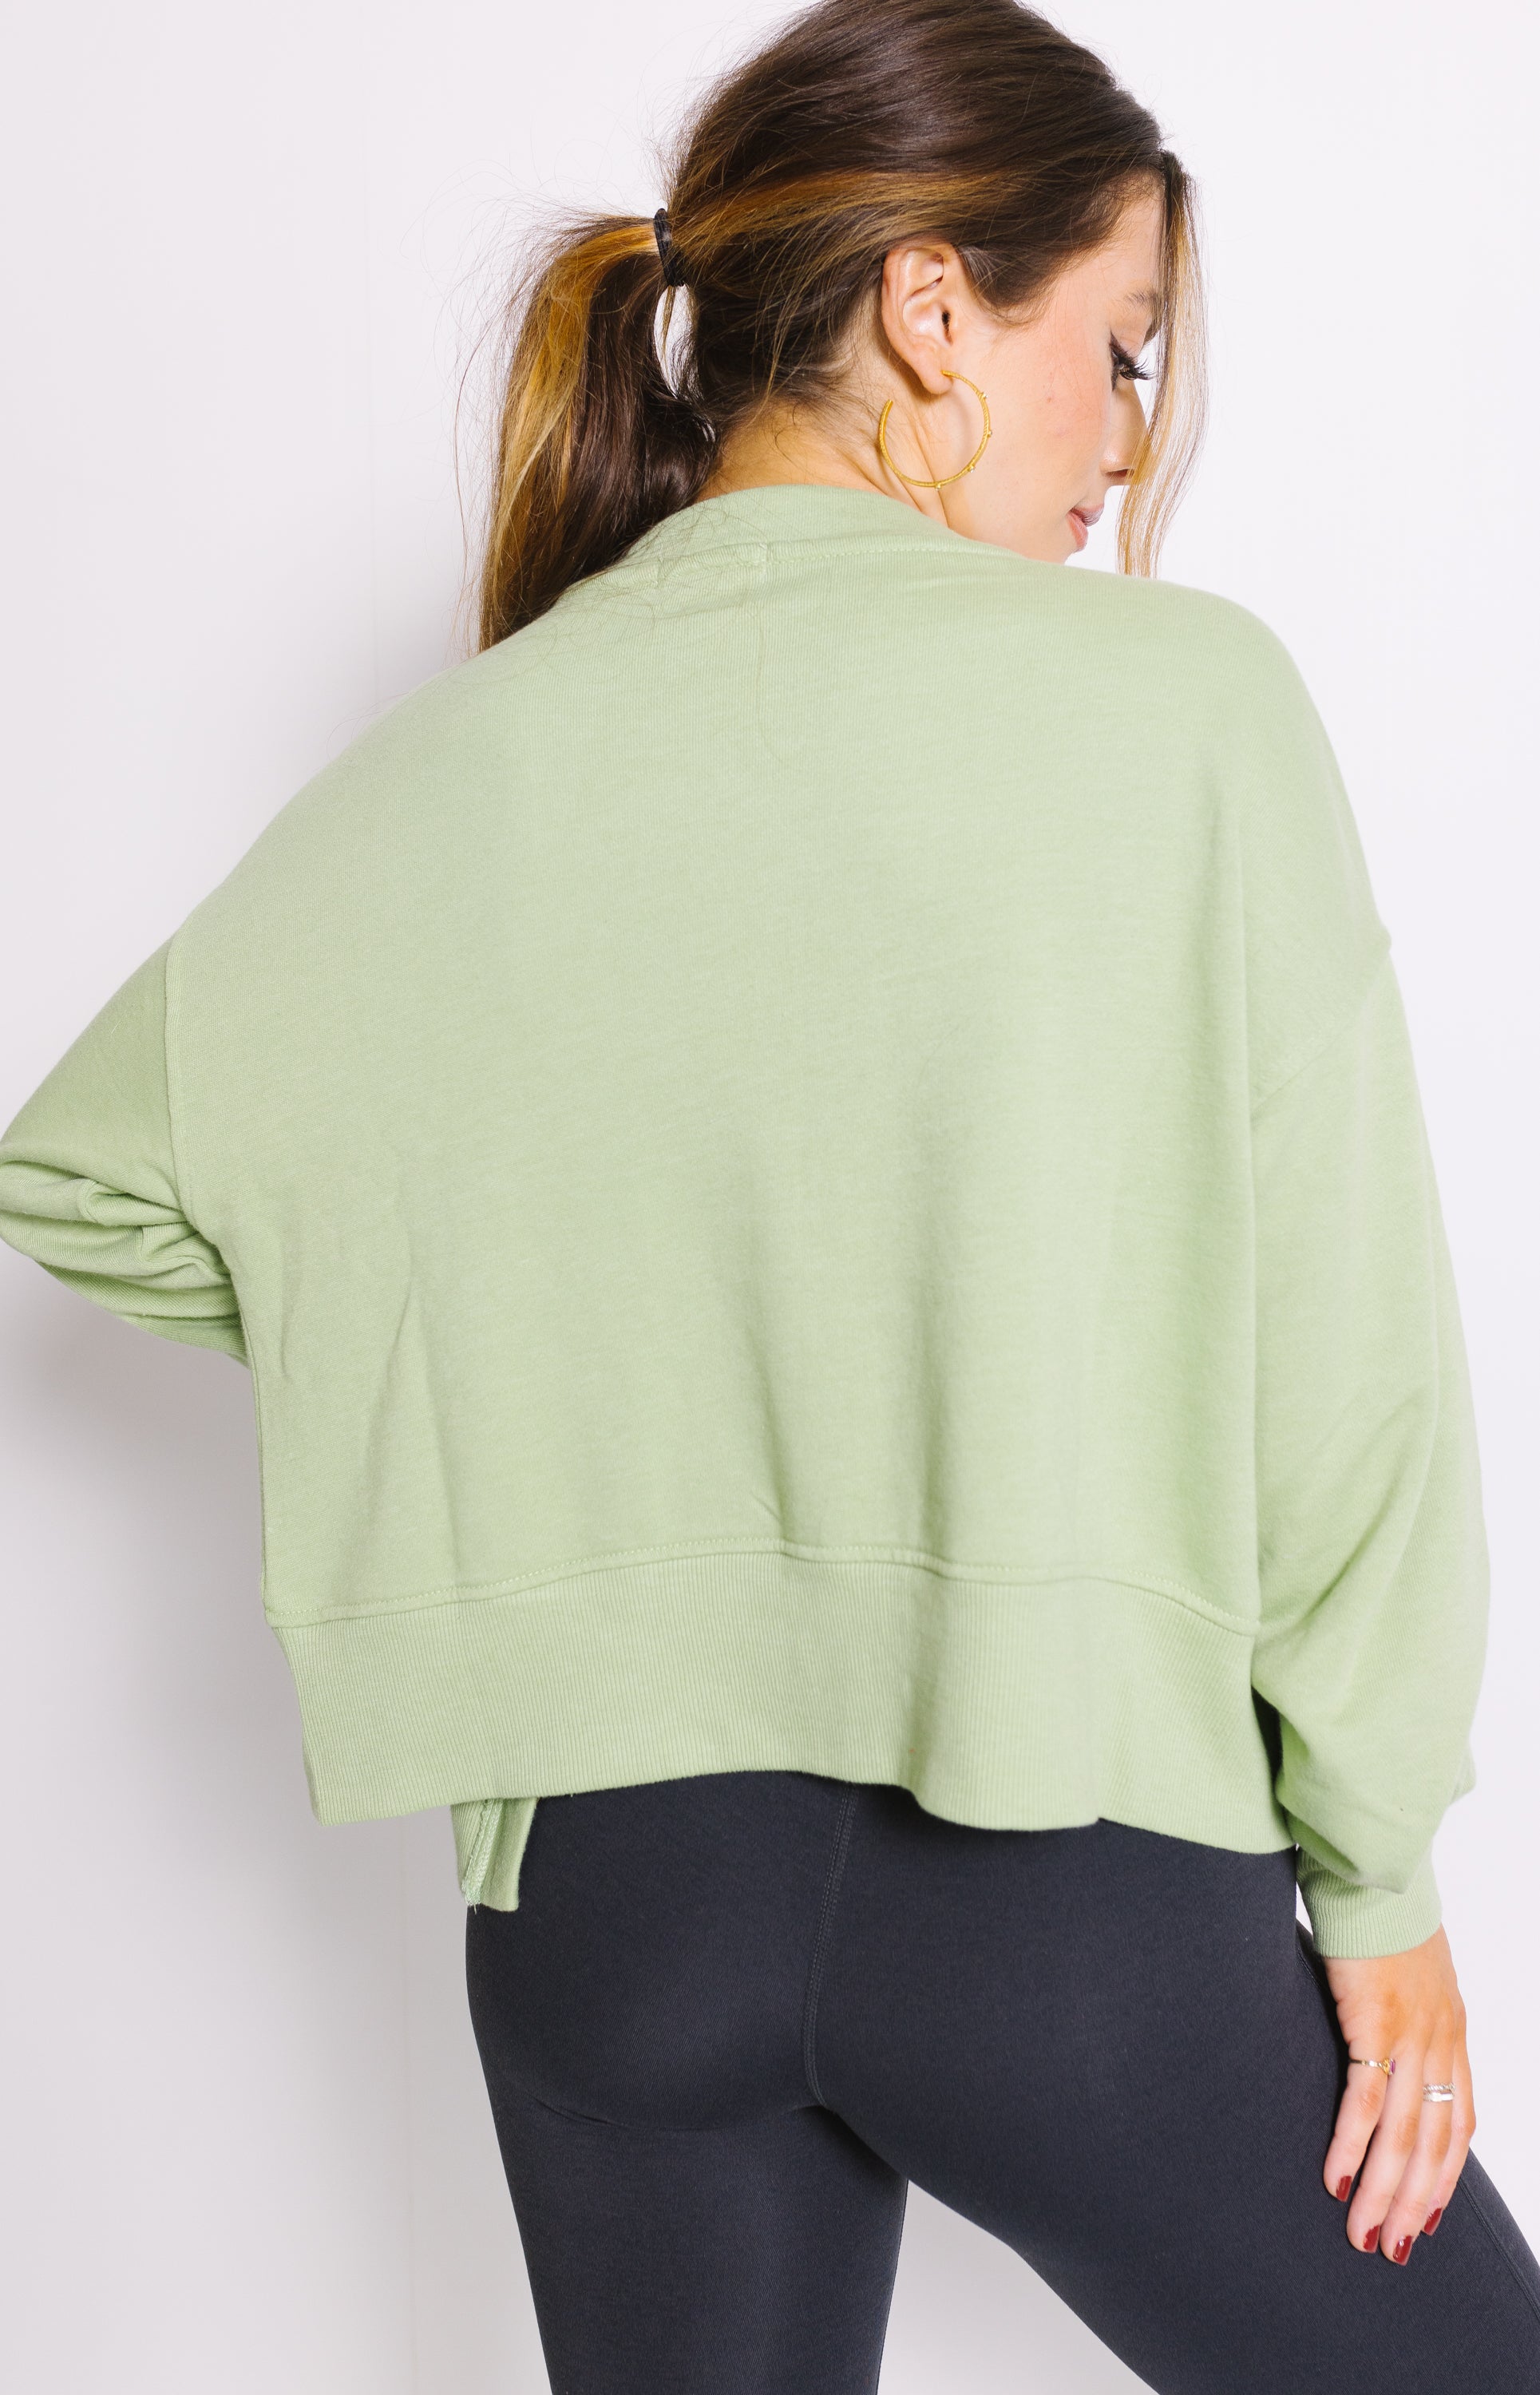 Ready for Anything Cardigan, FAIR GREEN